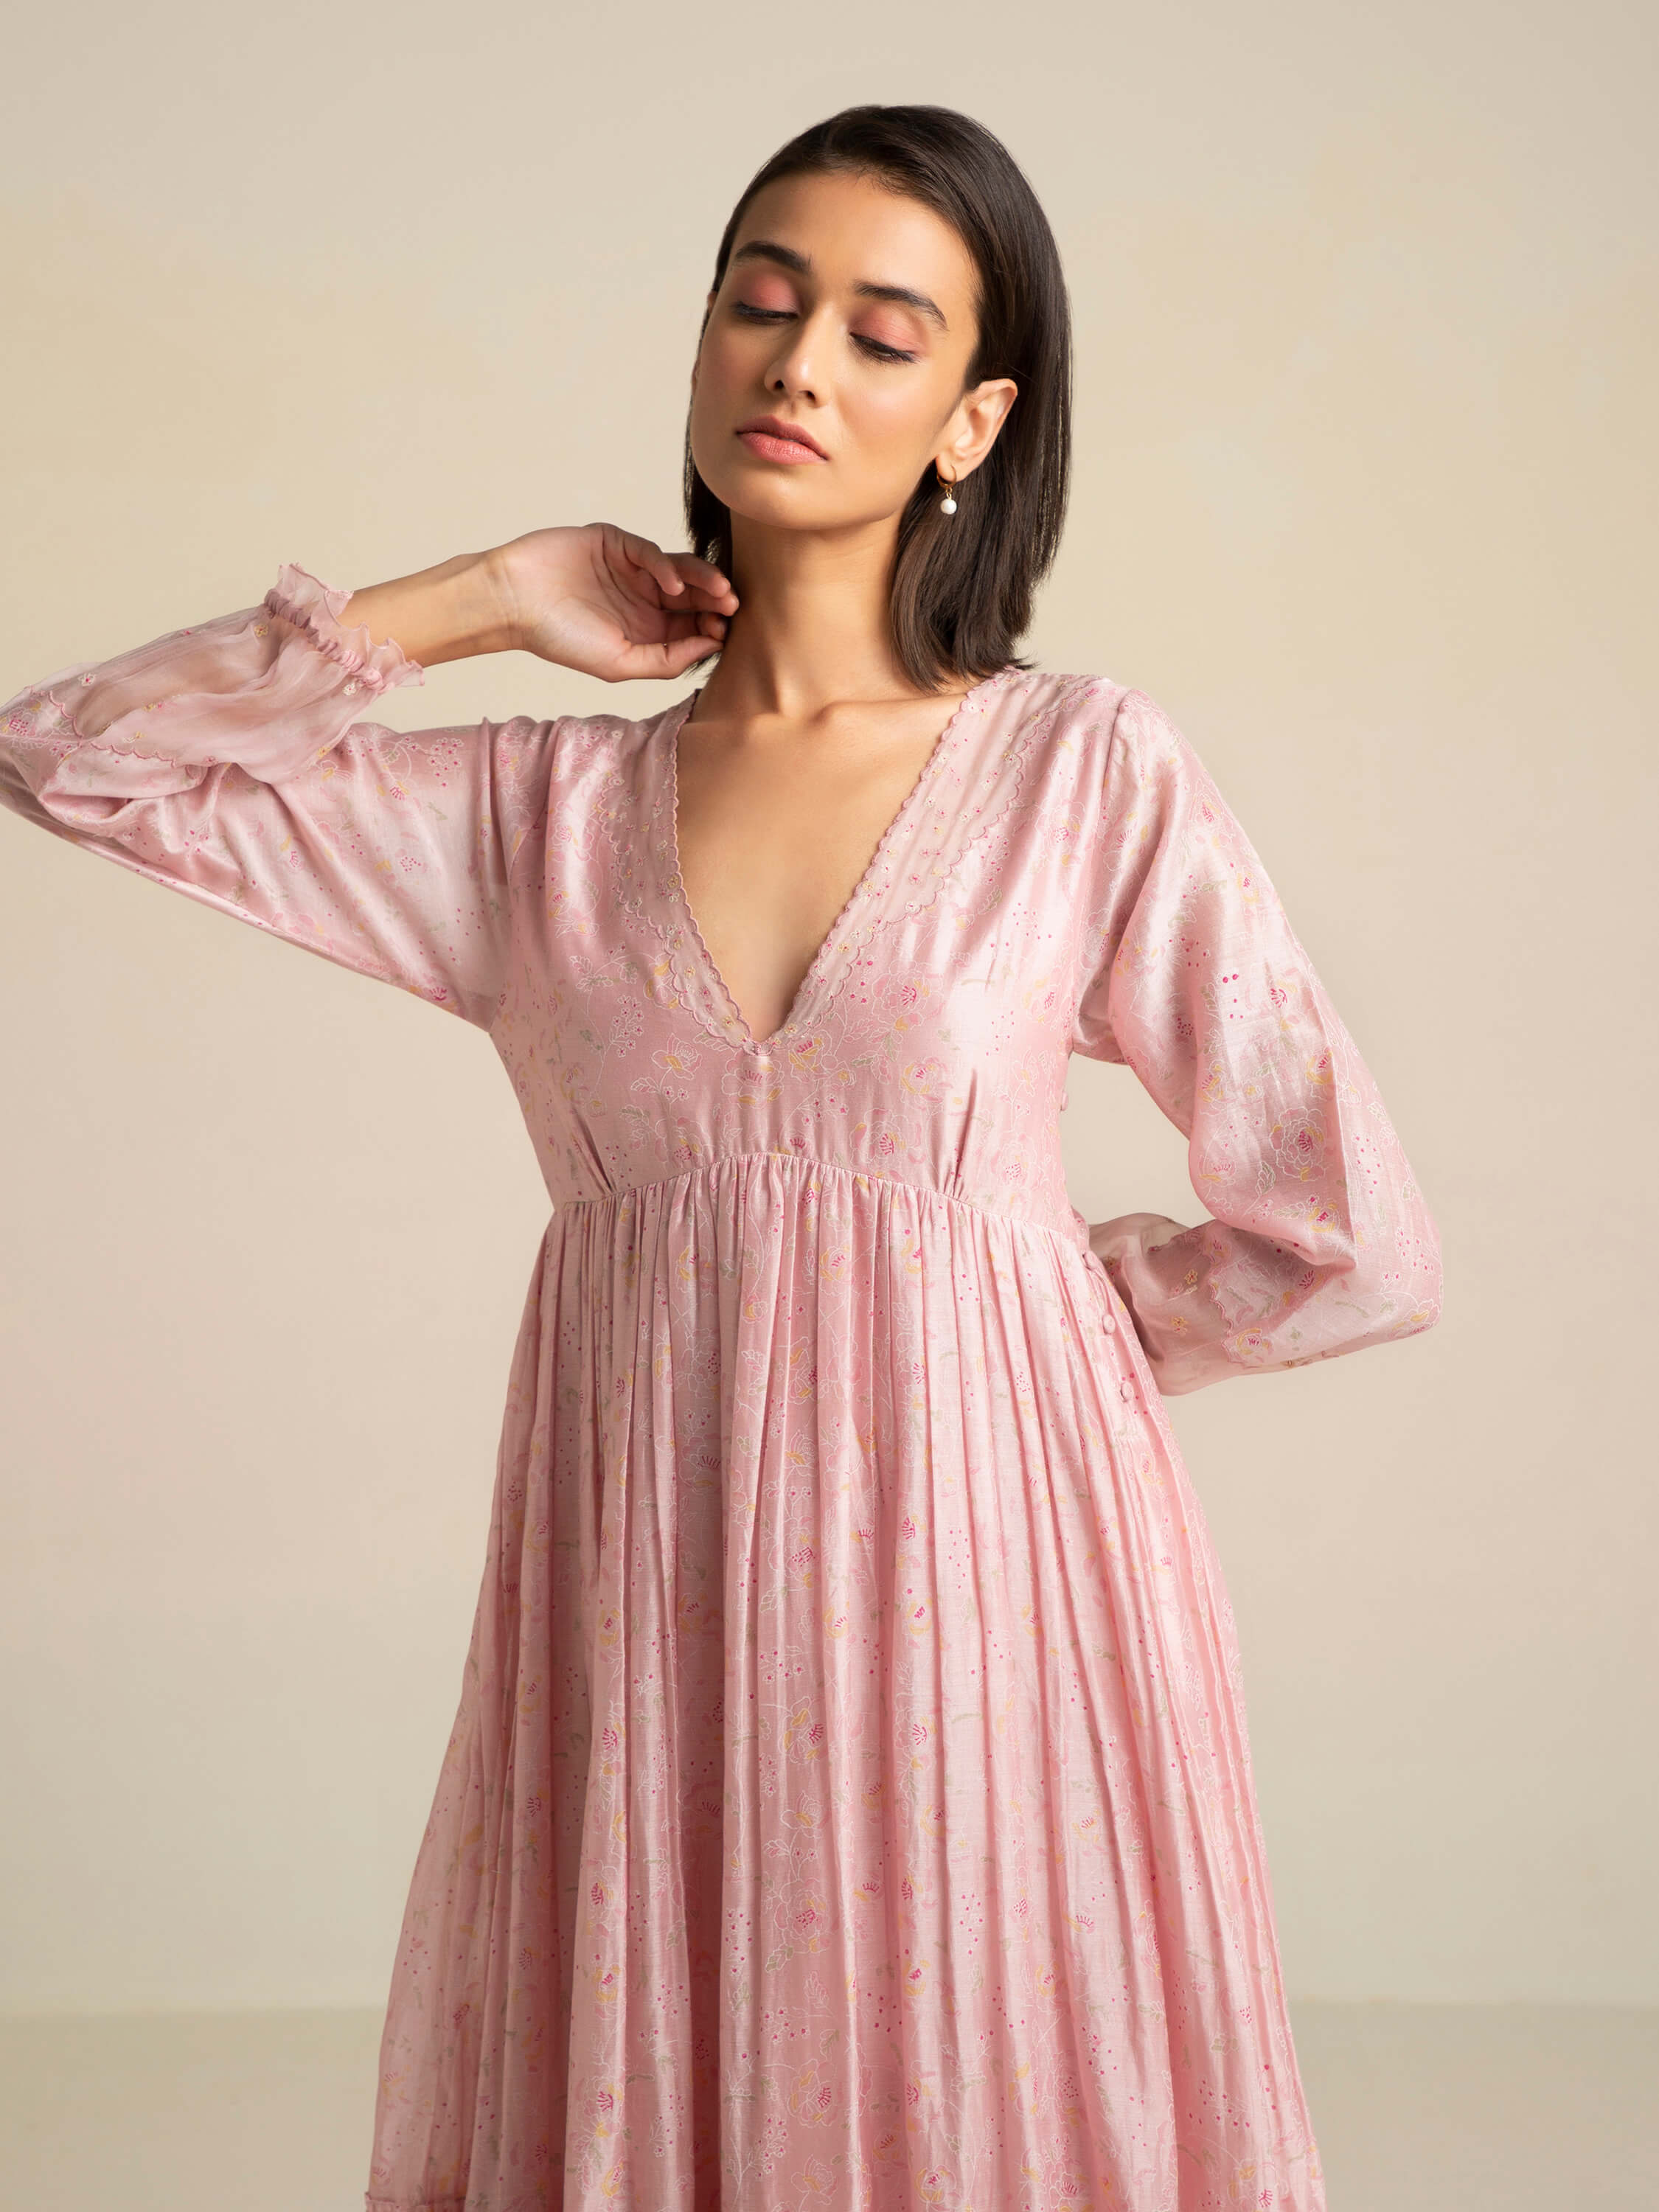 Woman in pink V-neck dress posing elegantly with closed eyes.